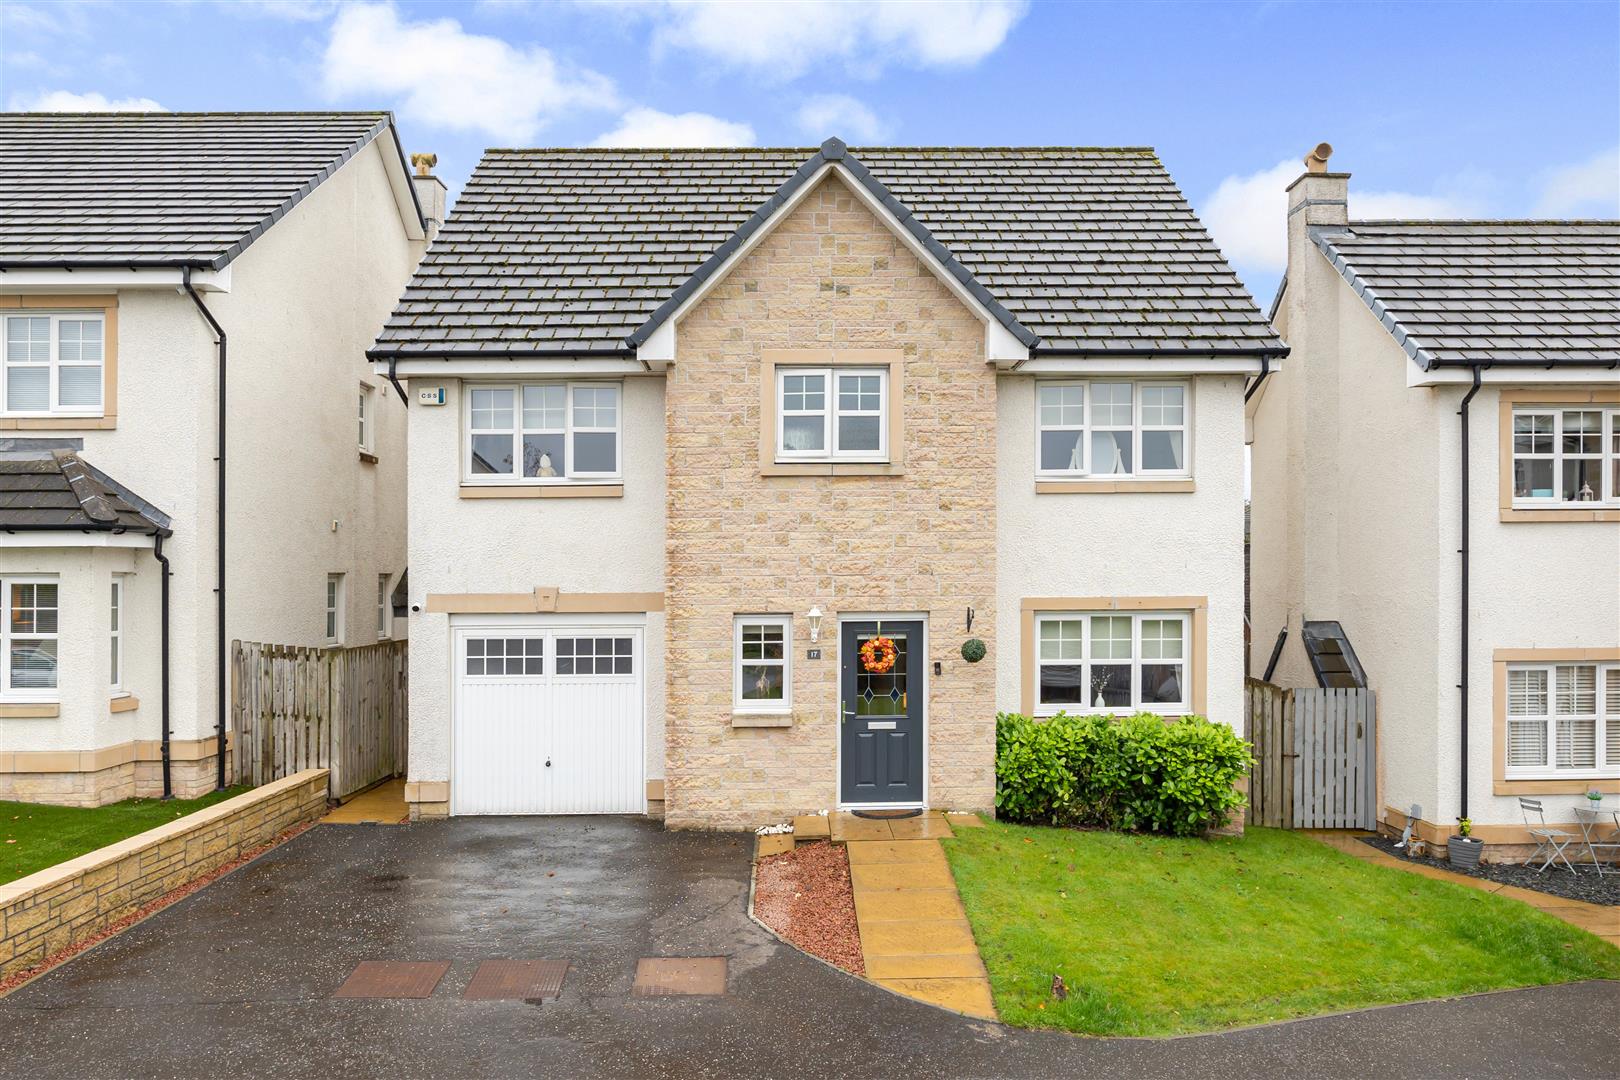 4 bed detached house for sale in Milne Drive, Falkirk, FK2 